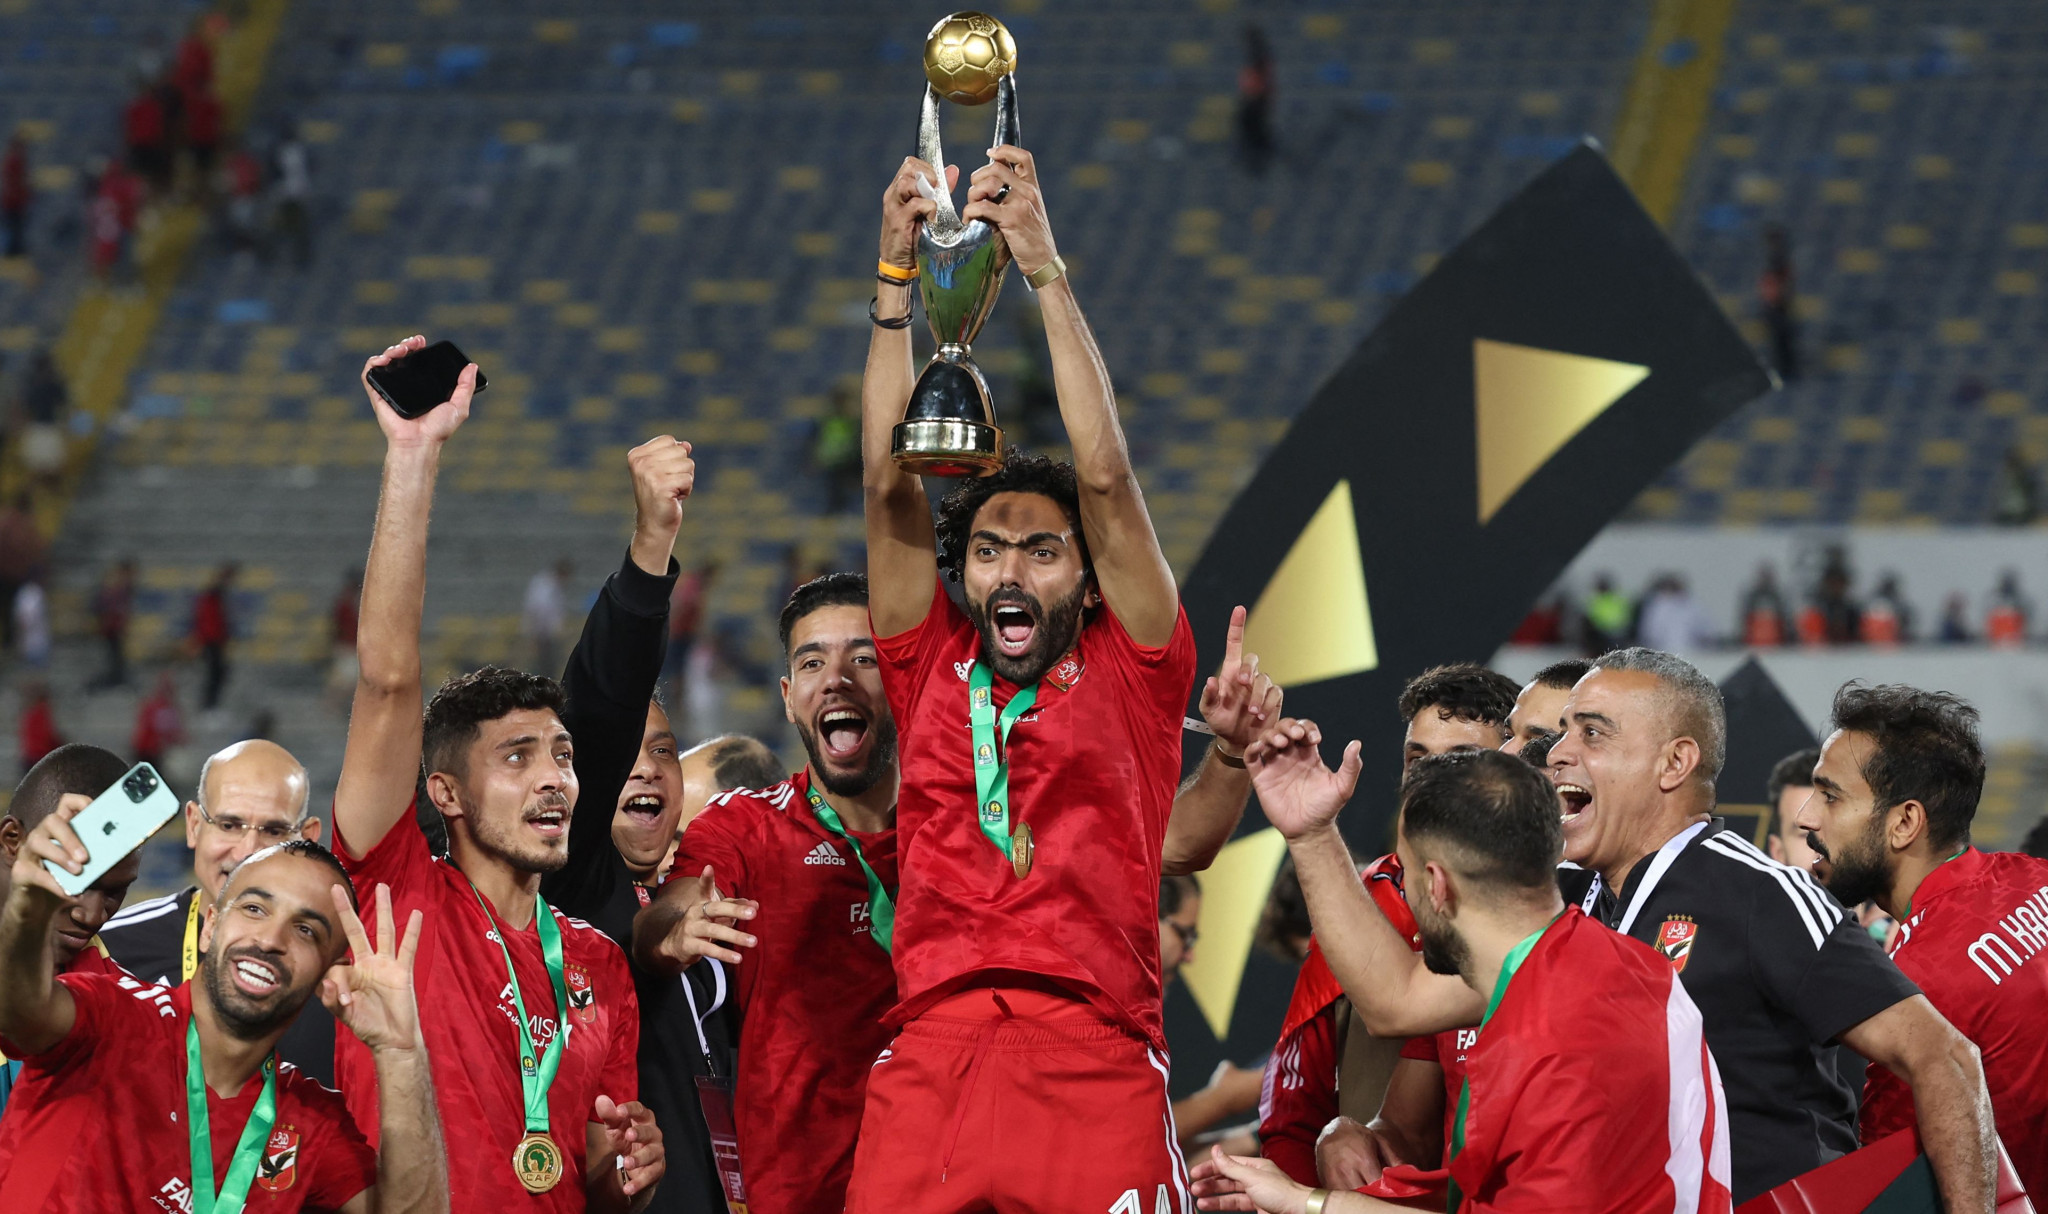 Al Ahly, the team to beat in the African Champions League